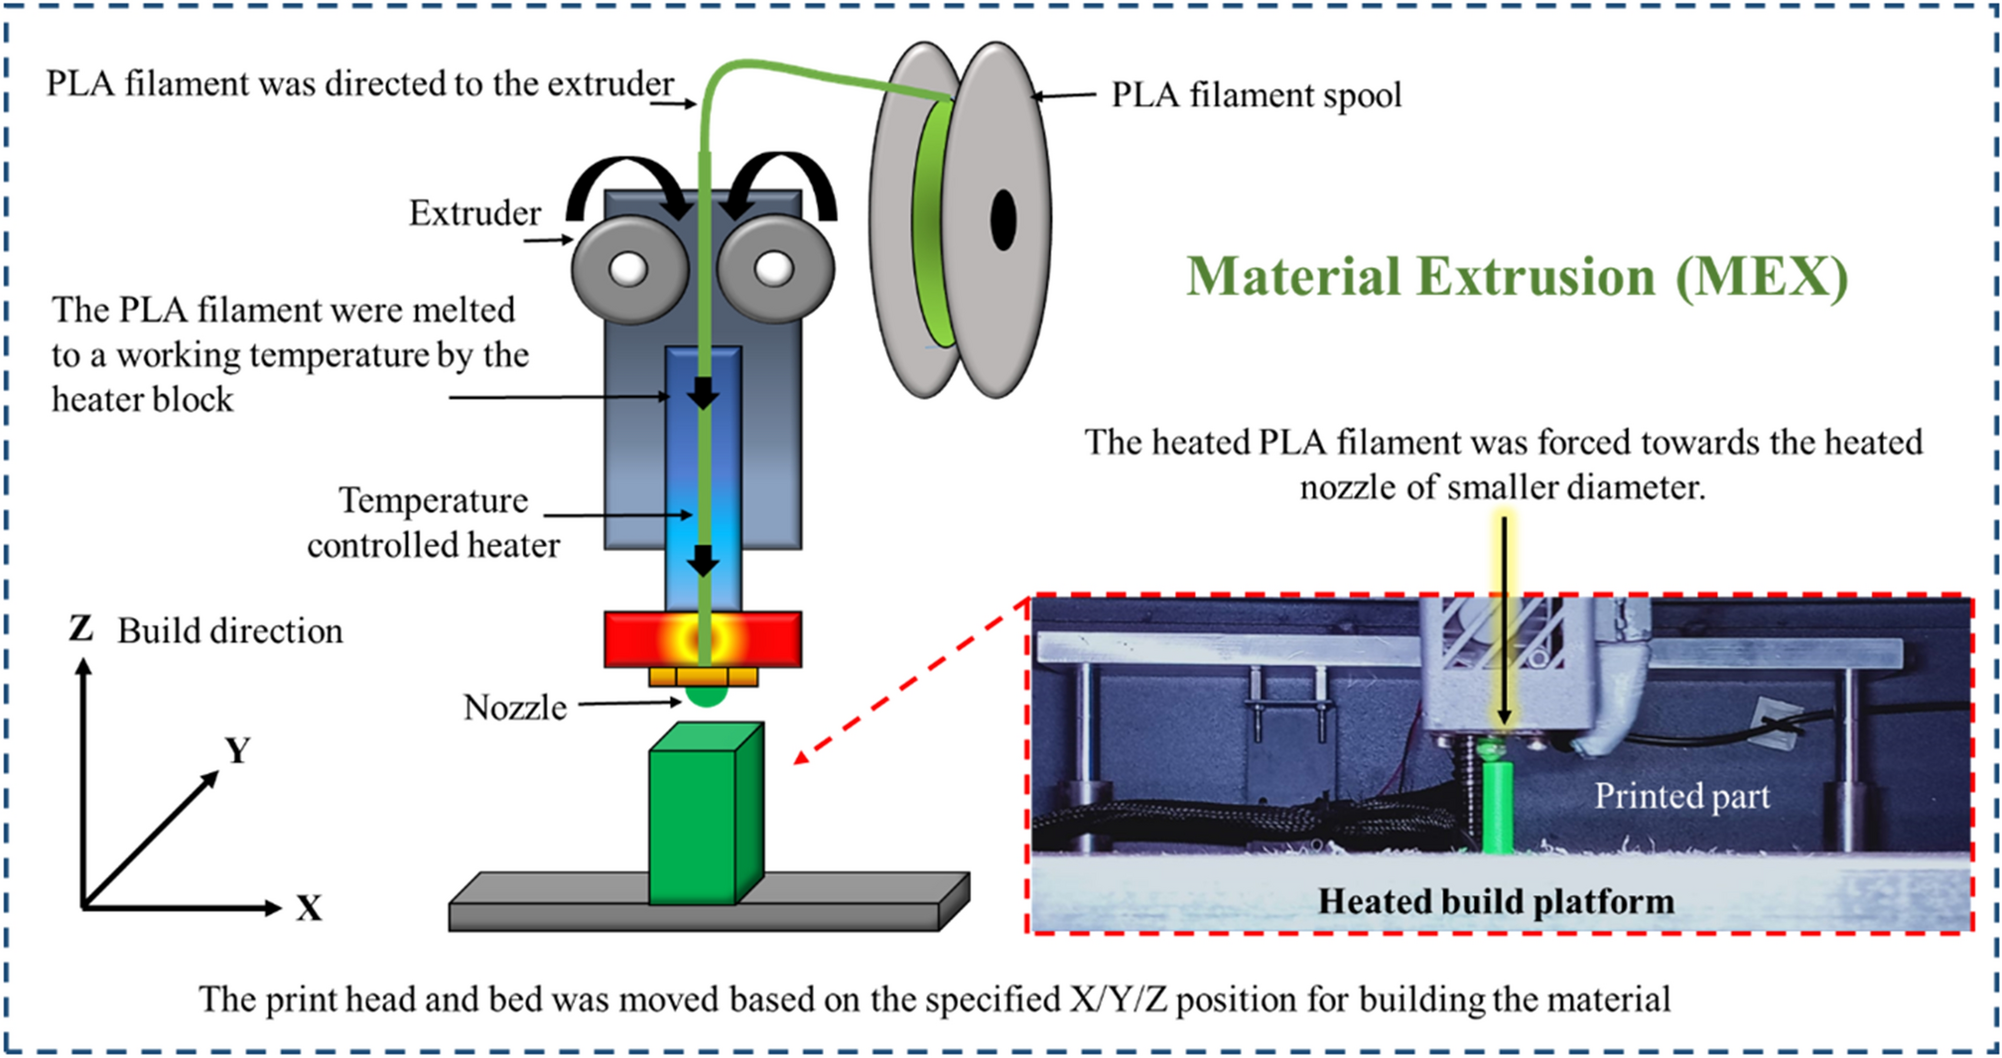 Achieving effective interlayer bonding of PLA parts during the material extrusion process with mechanical properties | Scientific Reports